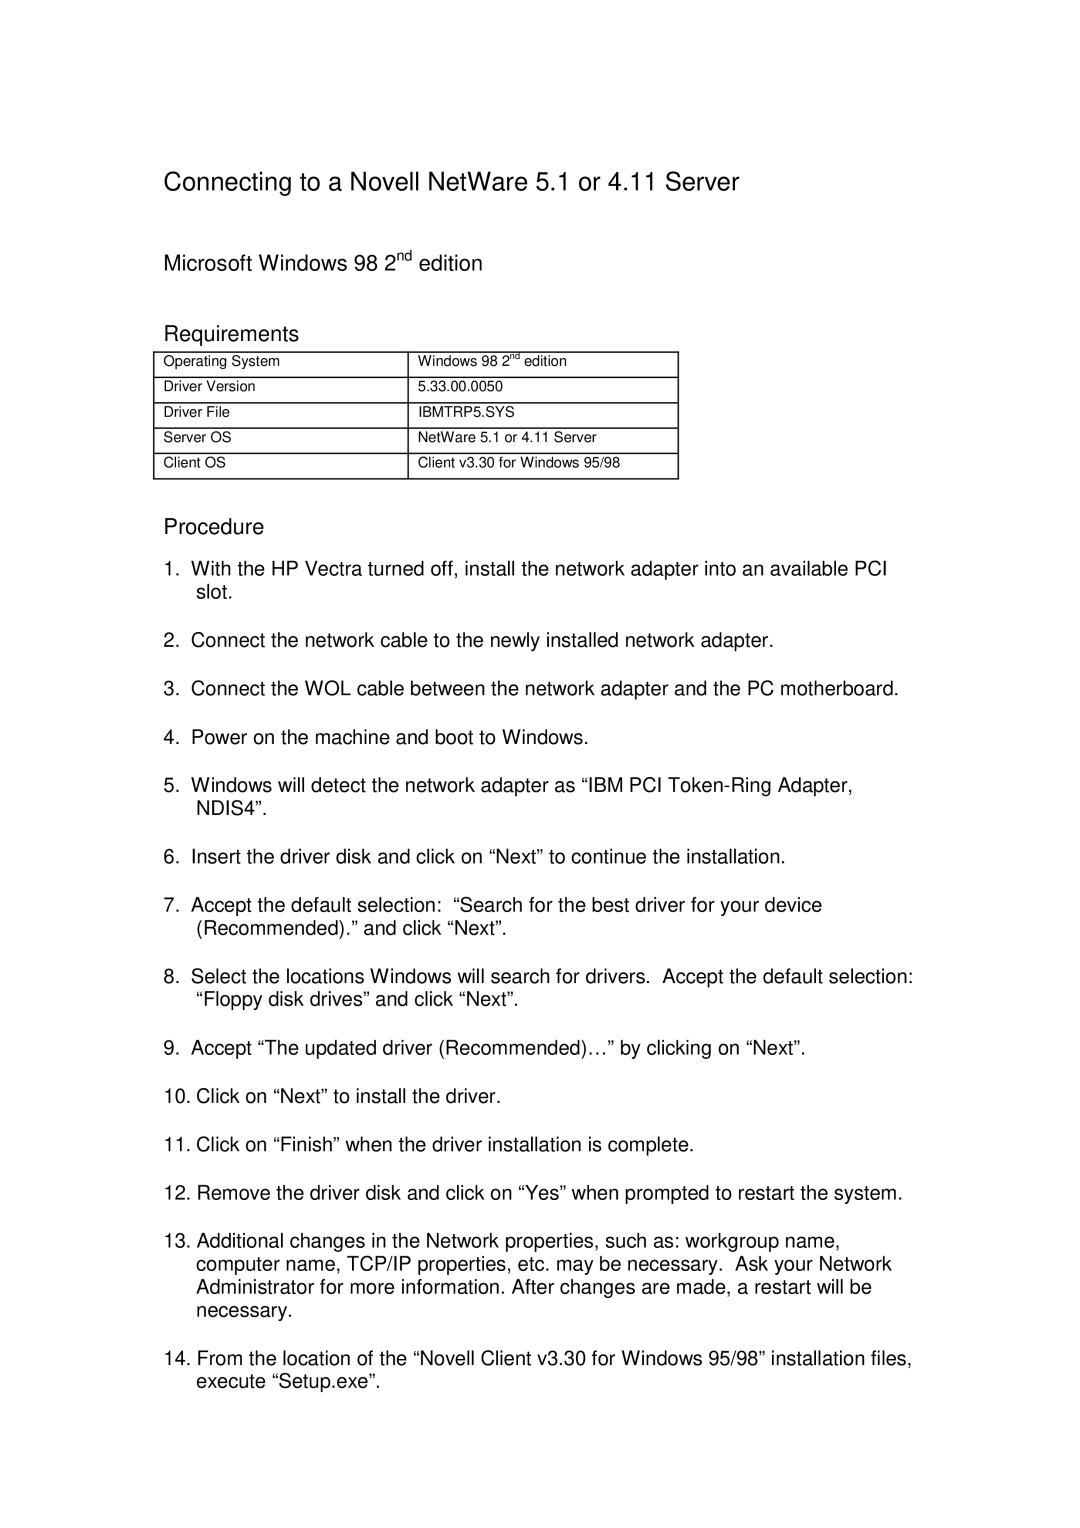 IBM WL2 manual Microsoft Windows 98 2nd edition Requirements, Connecting to a Novell NetWare 5.1 or 4.11 Server, Procedure 